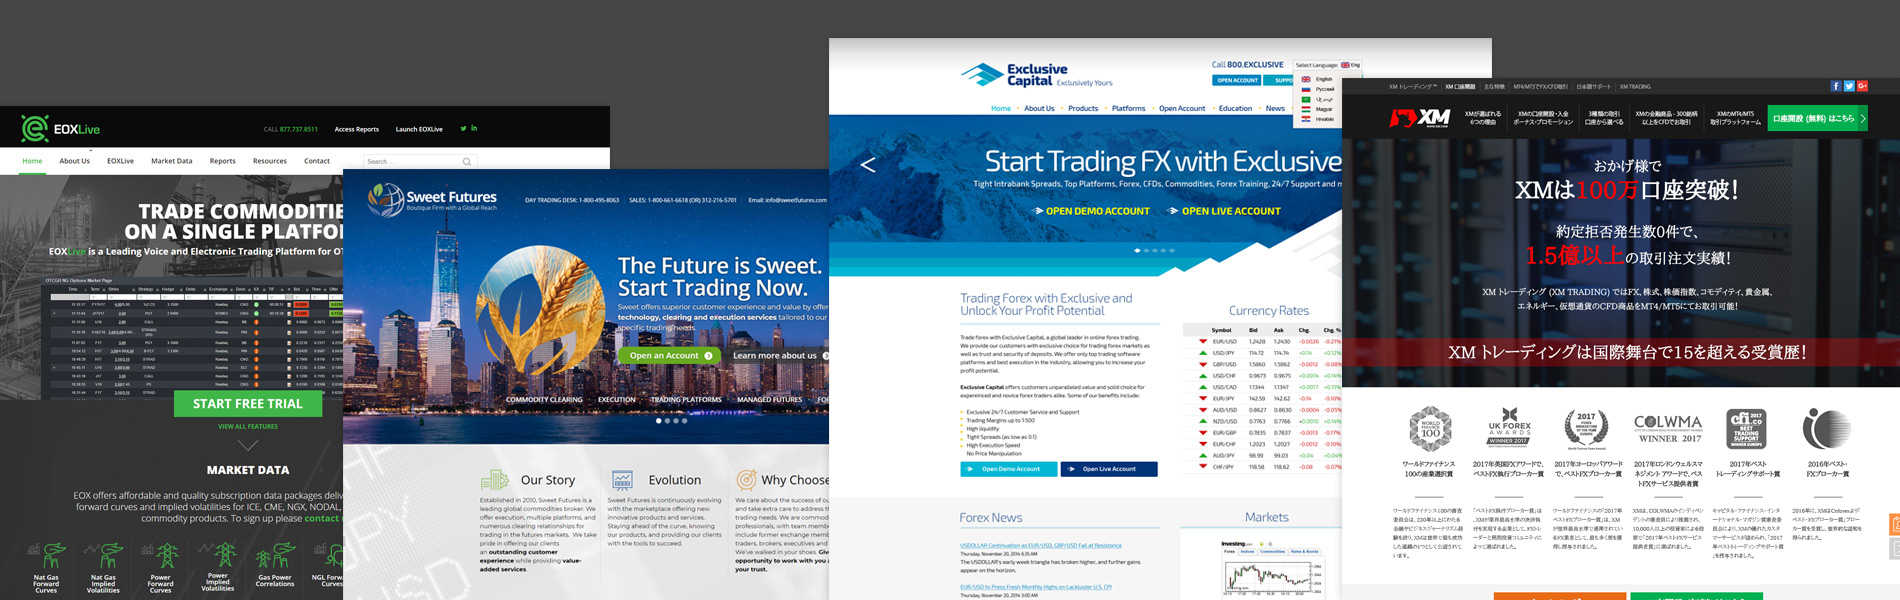 Forex trader website forexpros fr currencies eur usd chart